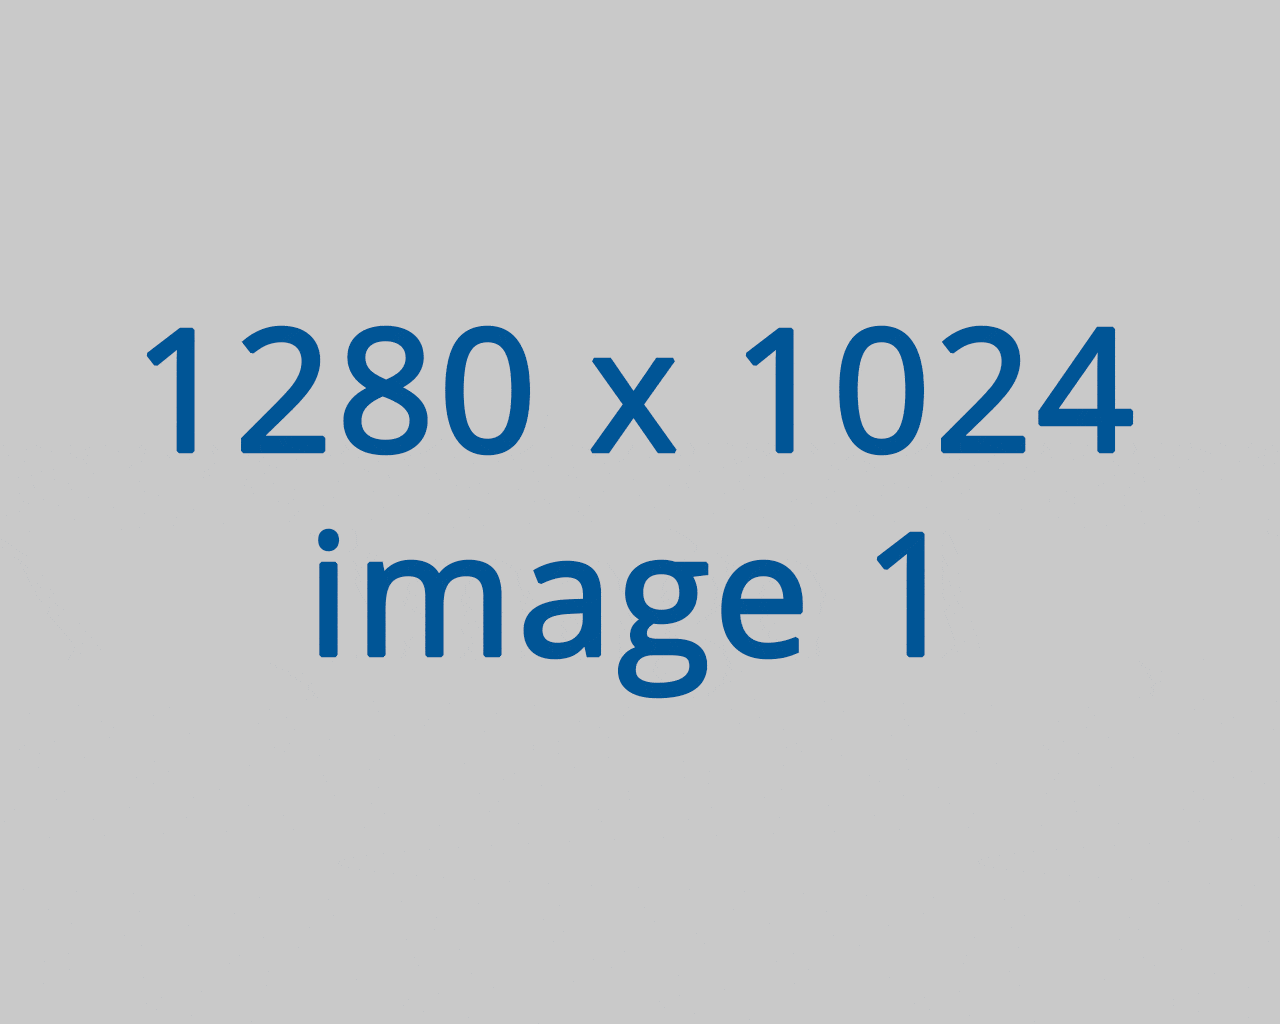 sample image 1, size 1280 by 960 pixels